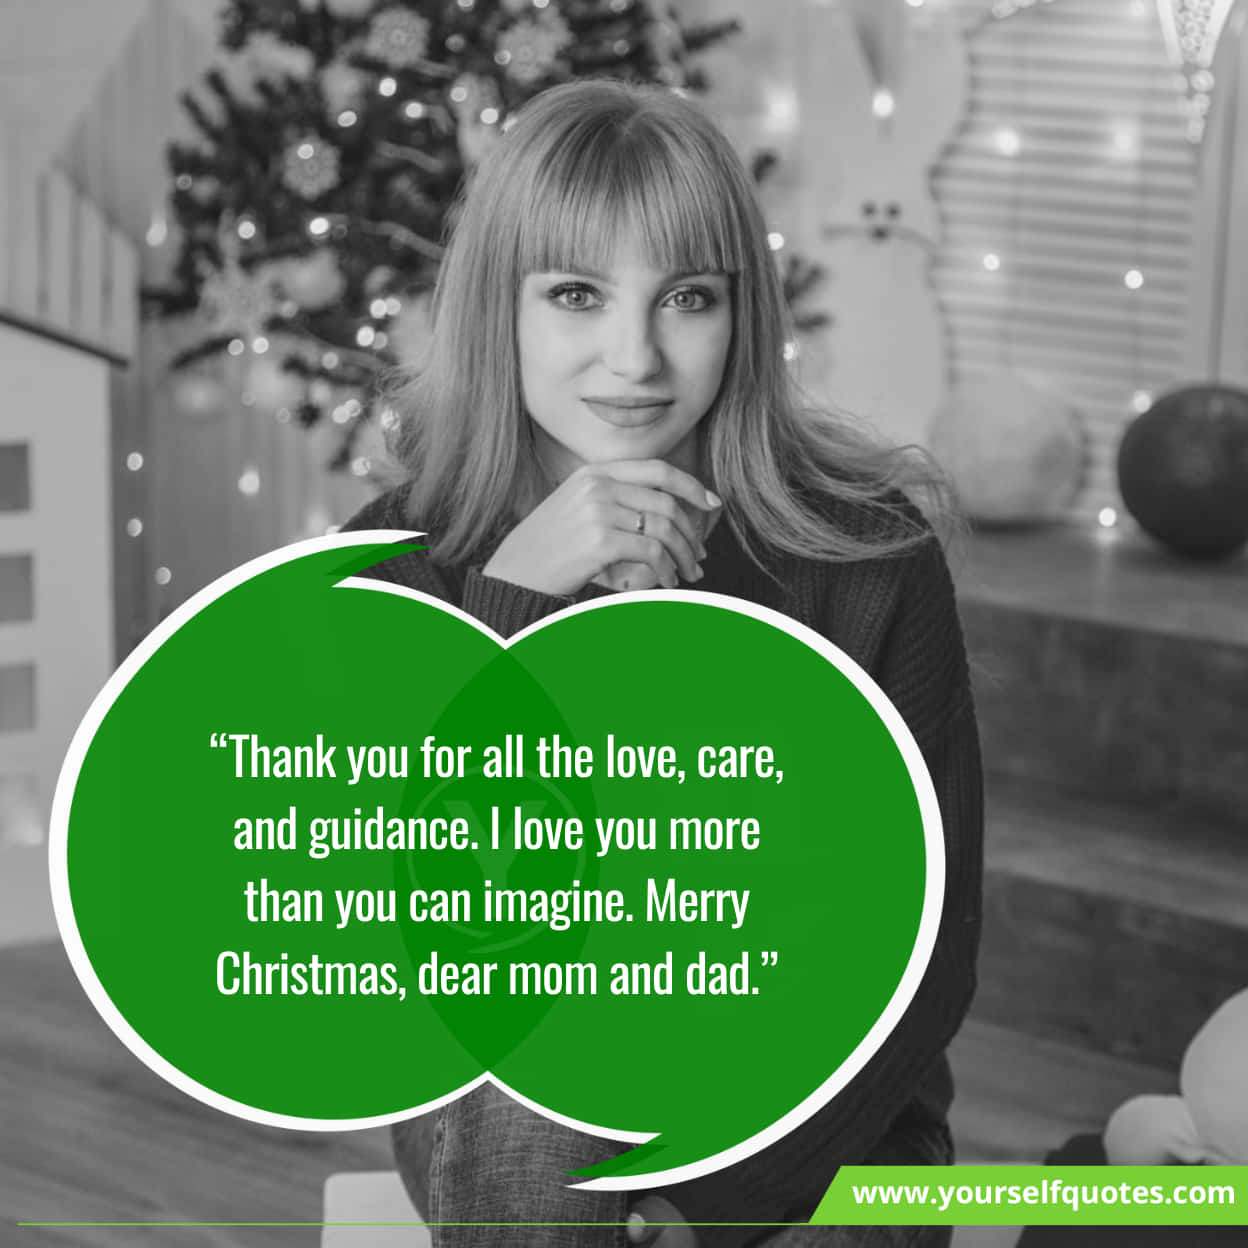 Merry Christmas Messages For Your Loved Ones